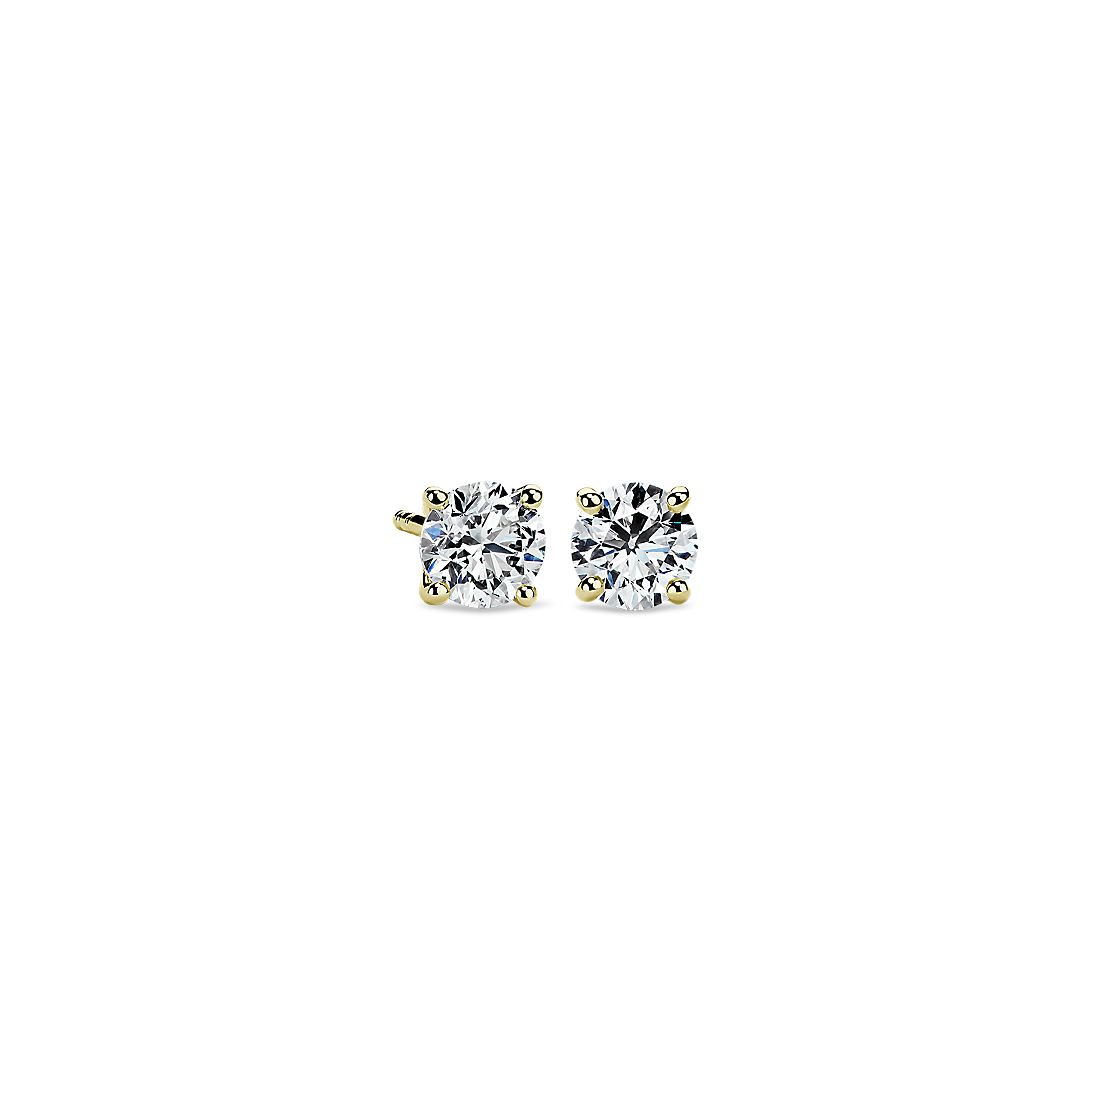 14k Yellow Gold Four-Claw Diamond Stud Earrings (0.96 ct. tw.)